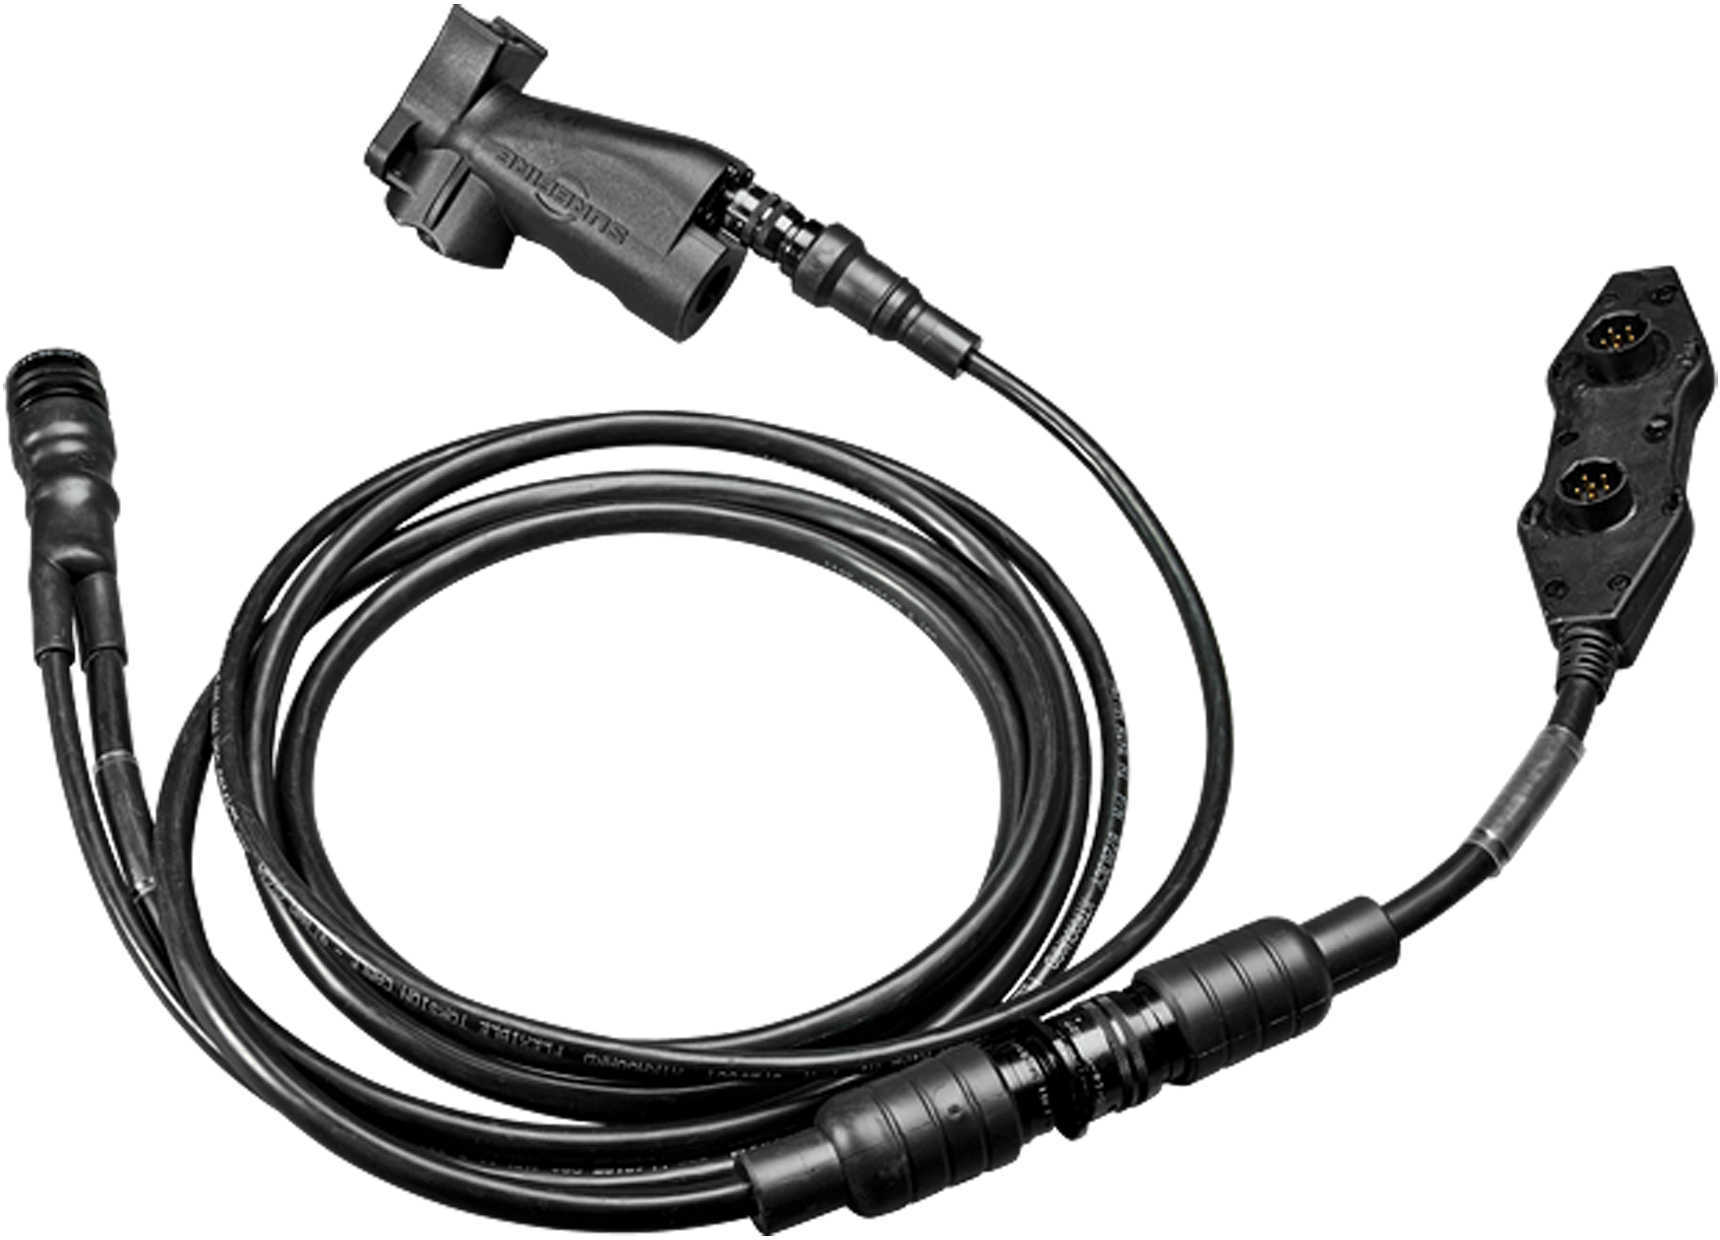 Surefire Switch Cable Assembly, for HF1 Hellfighter Md: UH-01D